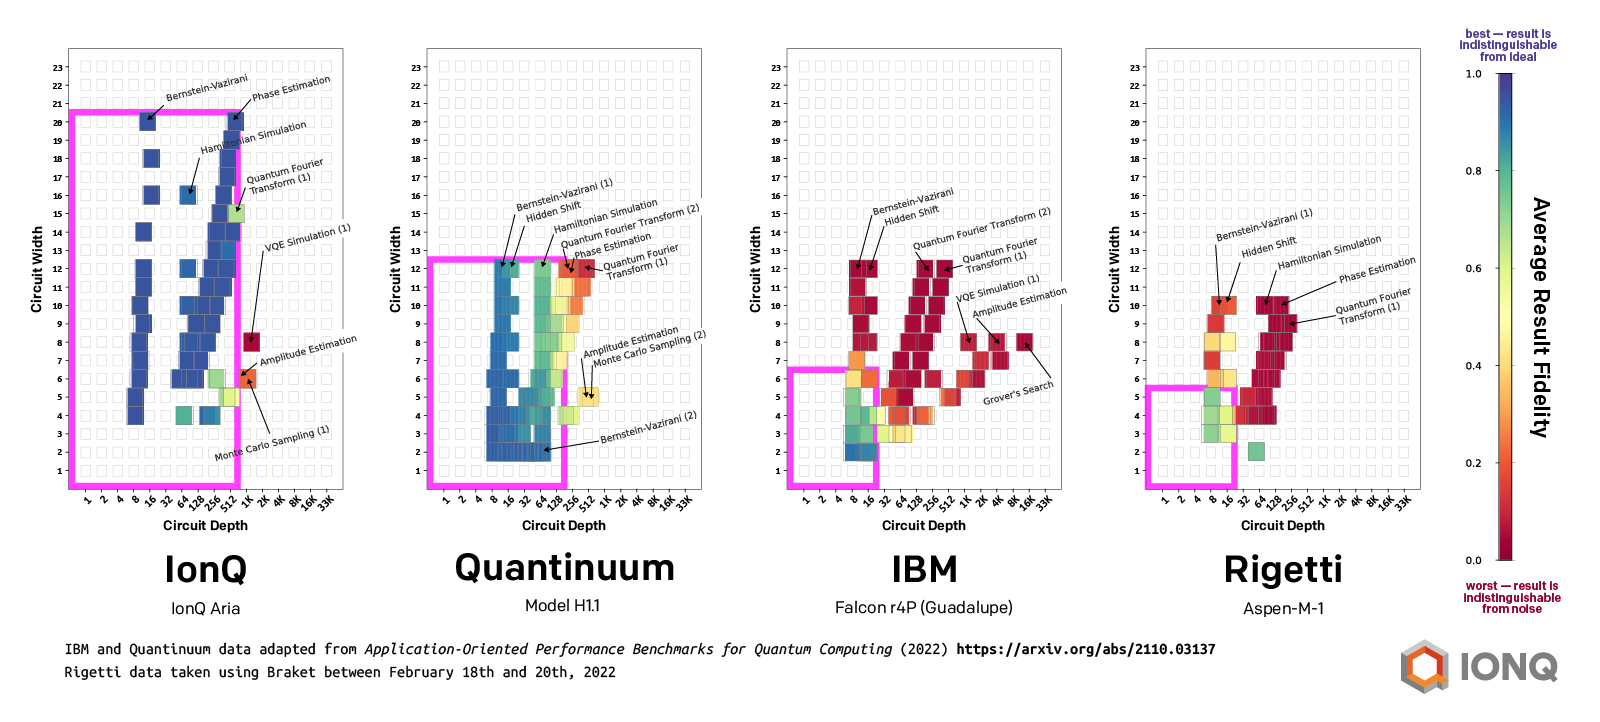 figure visualizing QED-C benchmarks on IonQ, IBM, Rigetti, and Quantinuum devices, showing IonQ's performance as the best